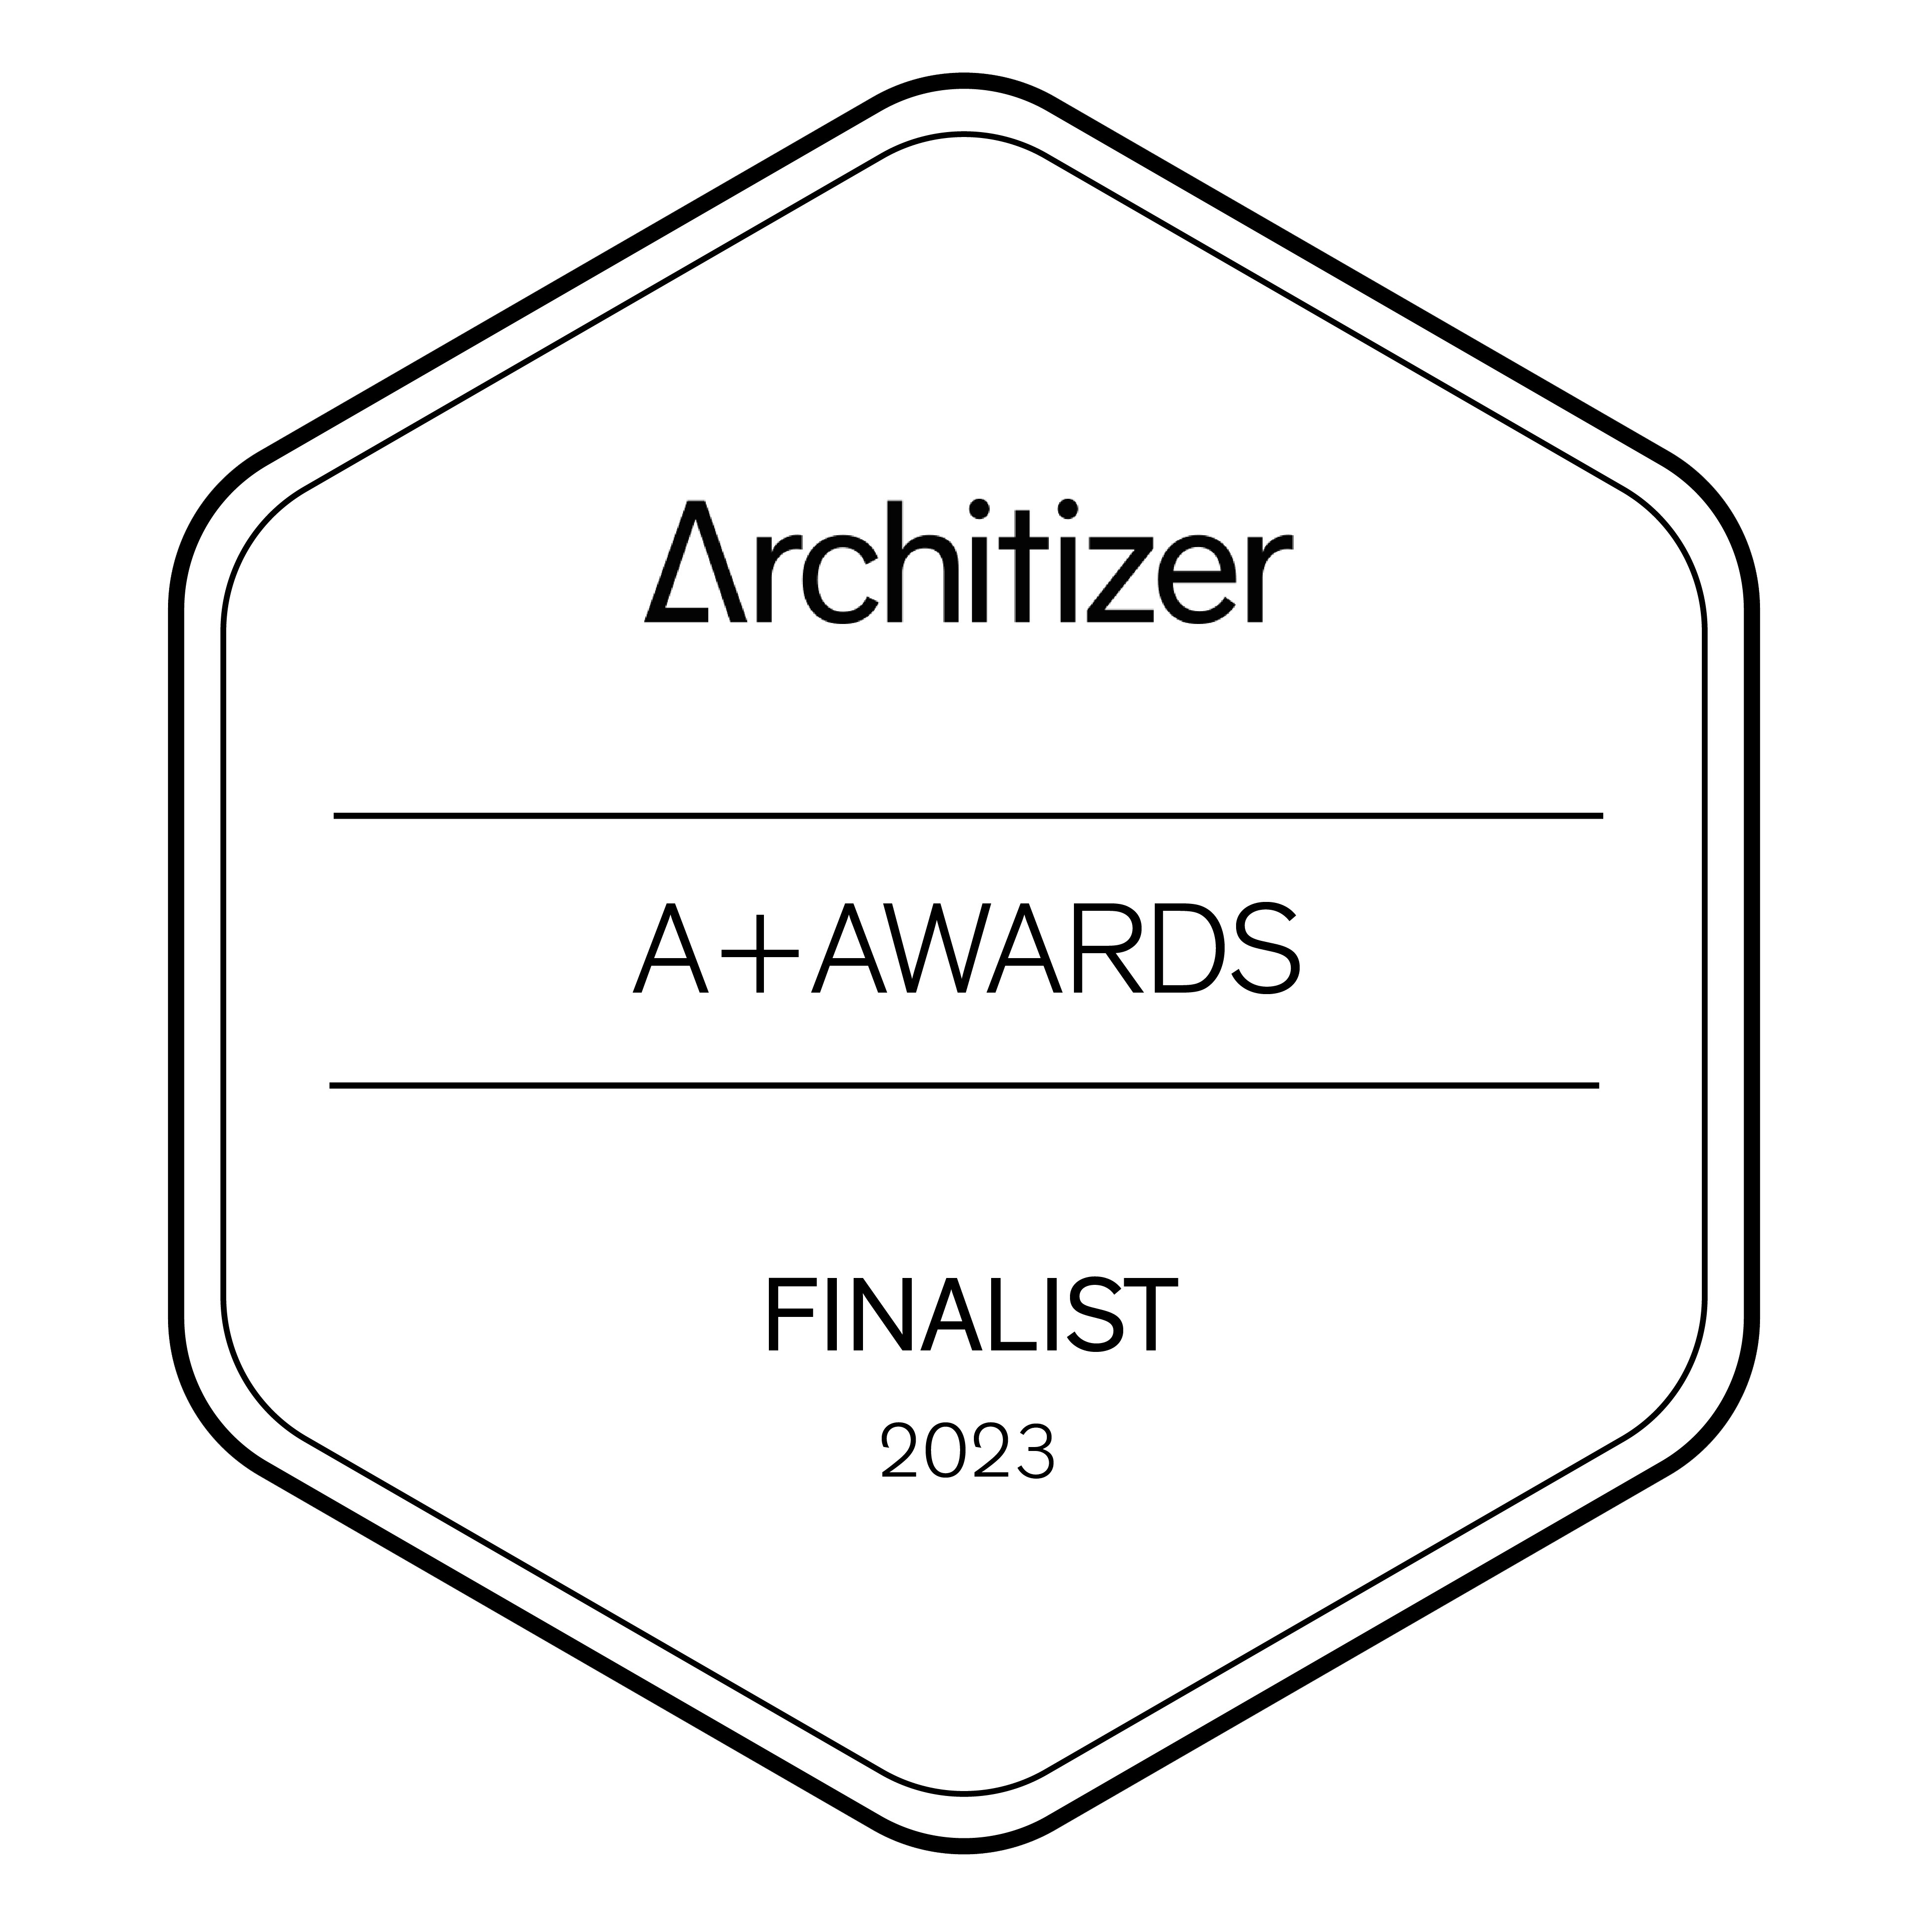 Han Pao-Teh Memorial Museum named finalist for 2023 Architizer A+